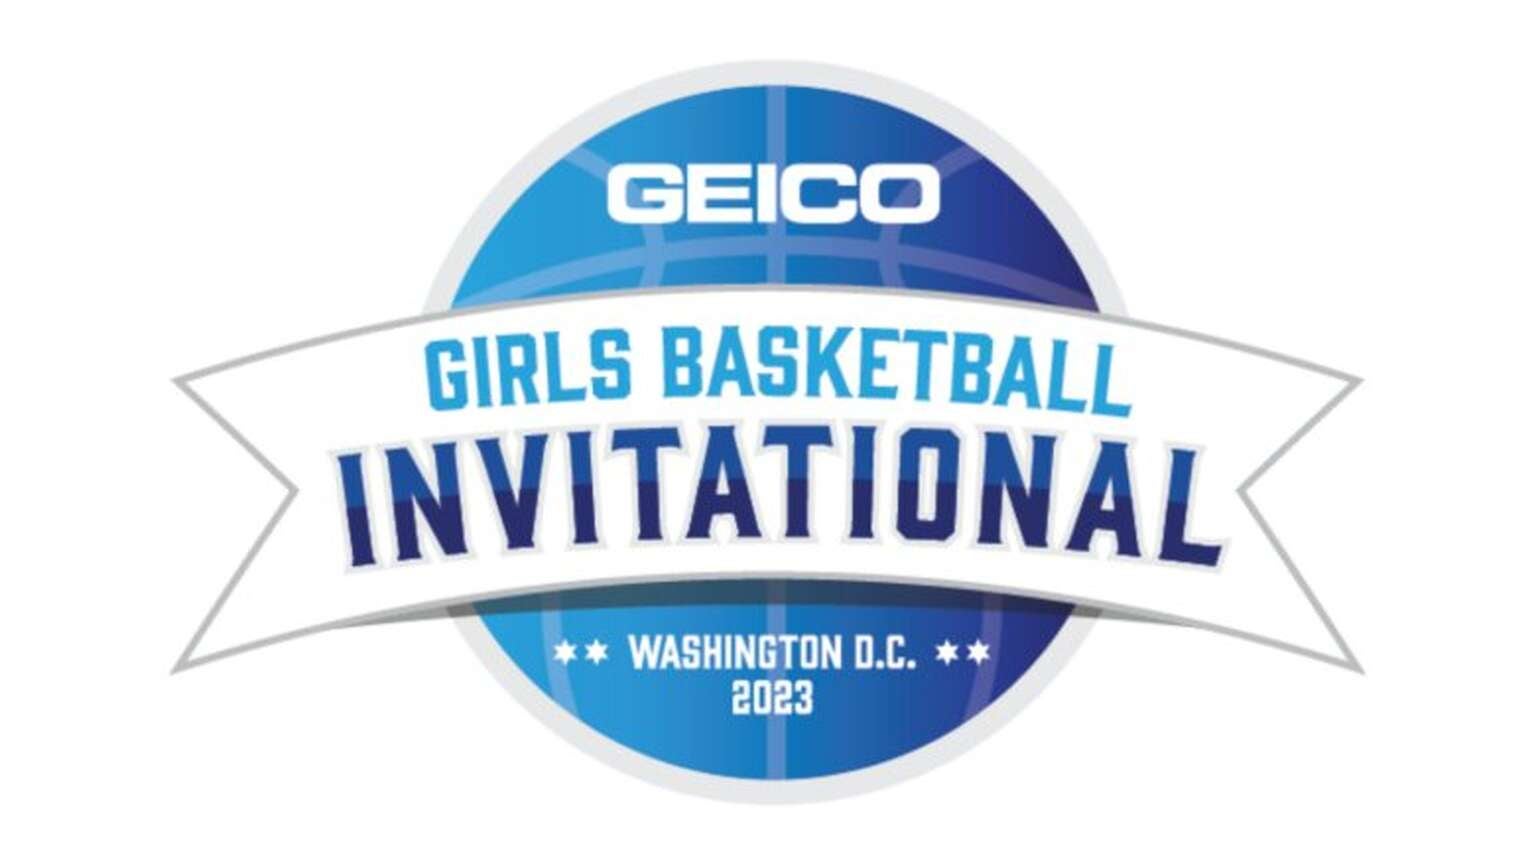 How to Watch 2023 GEICO Girls Basketball Invitational Live For Free